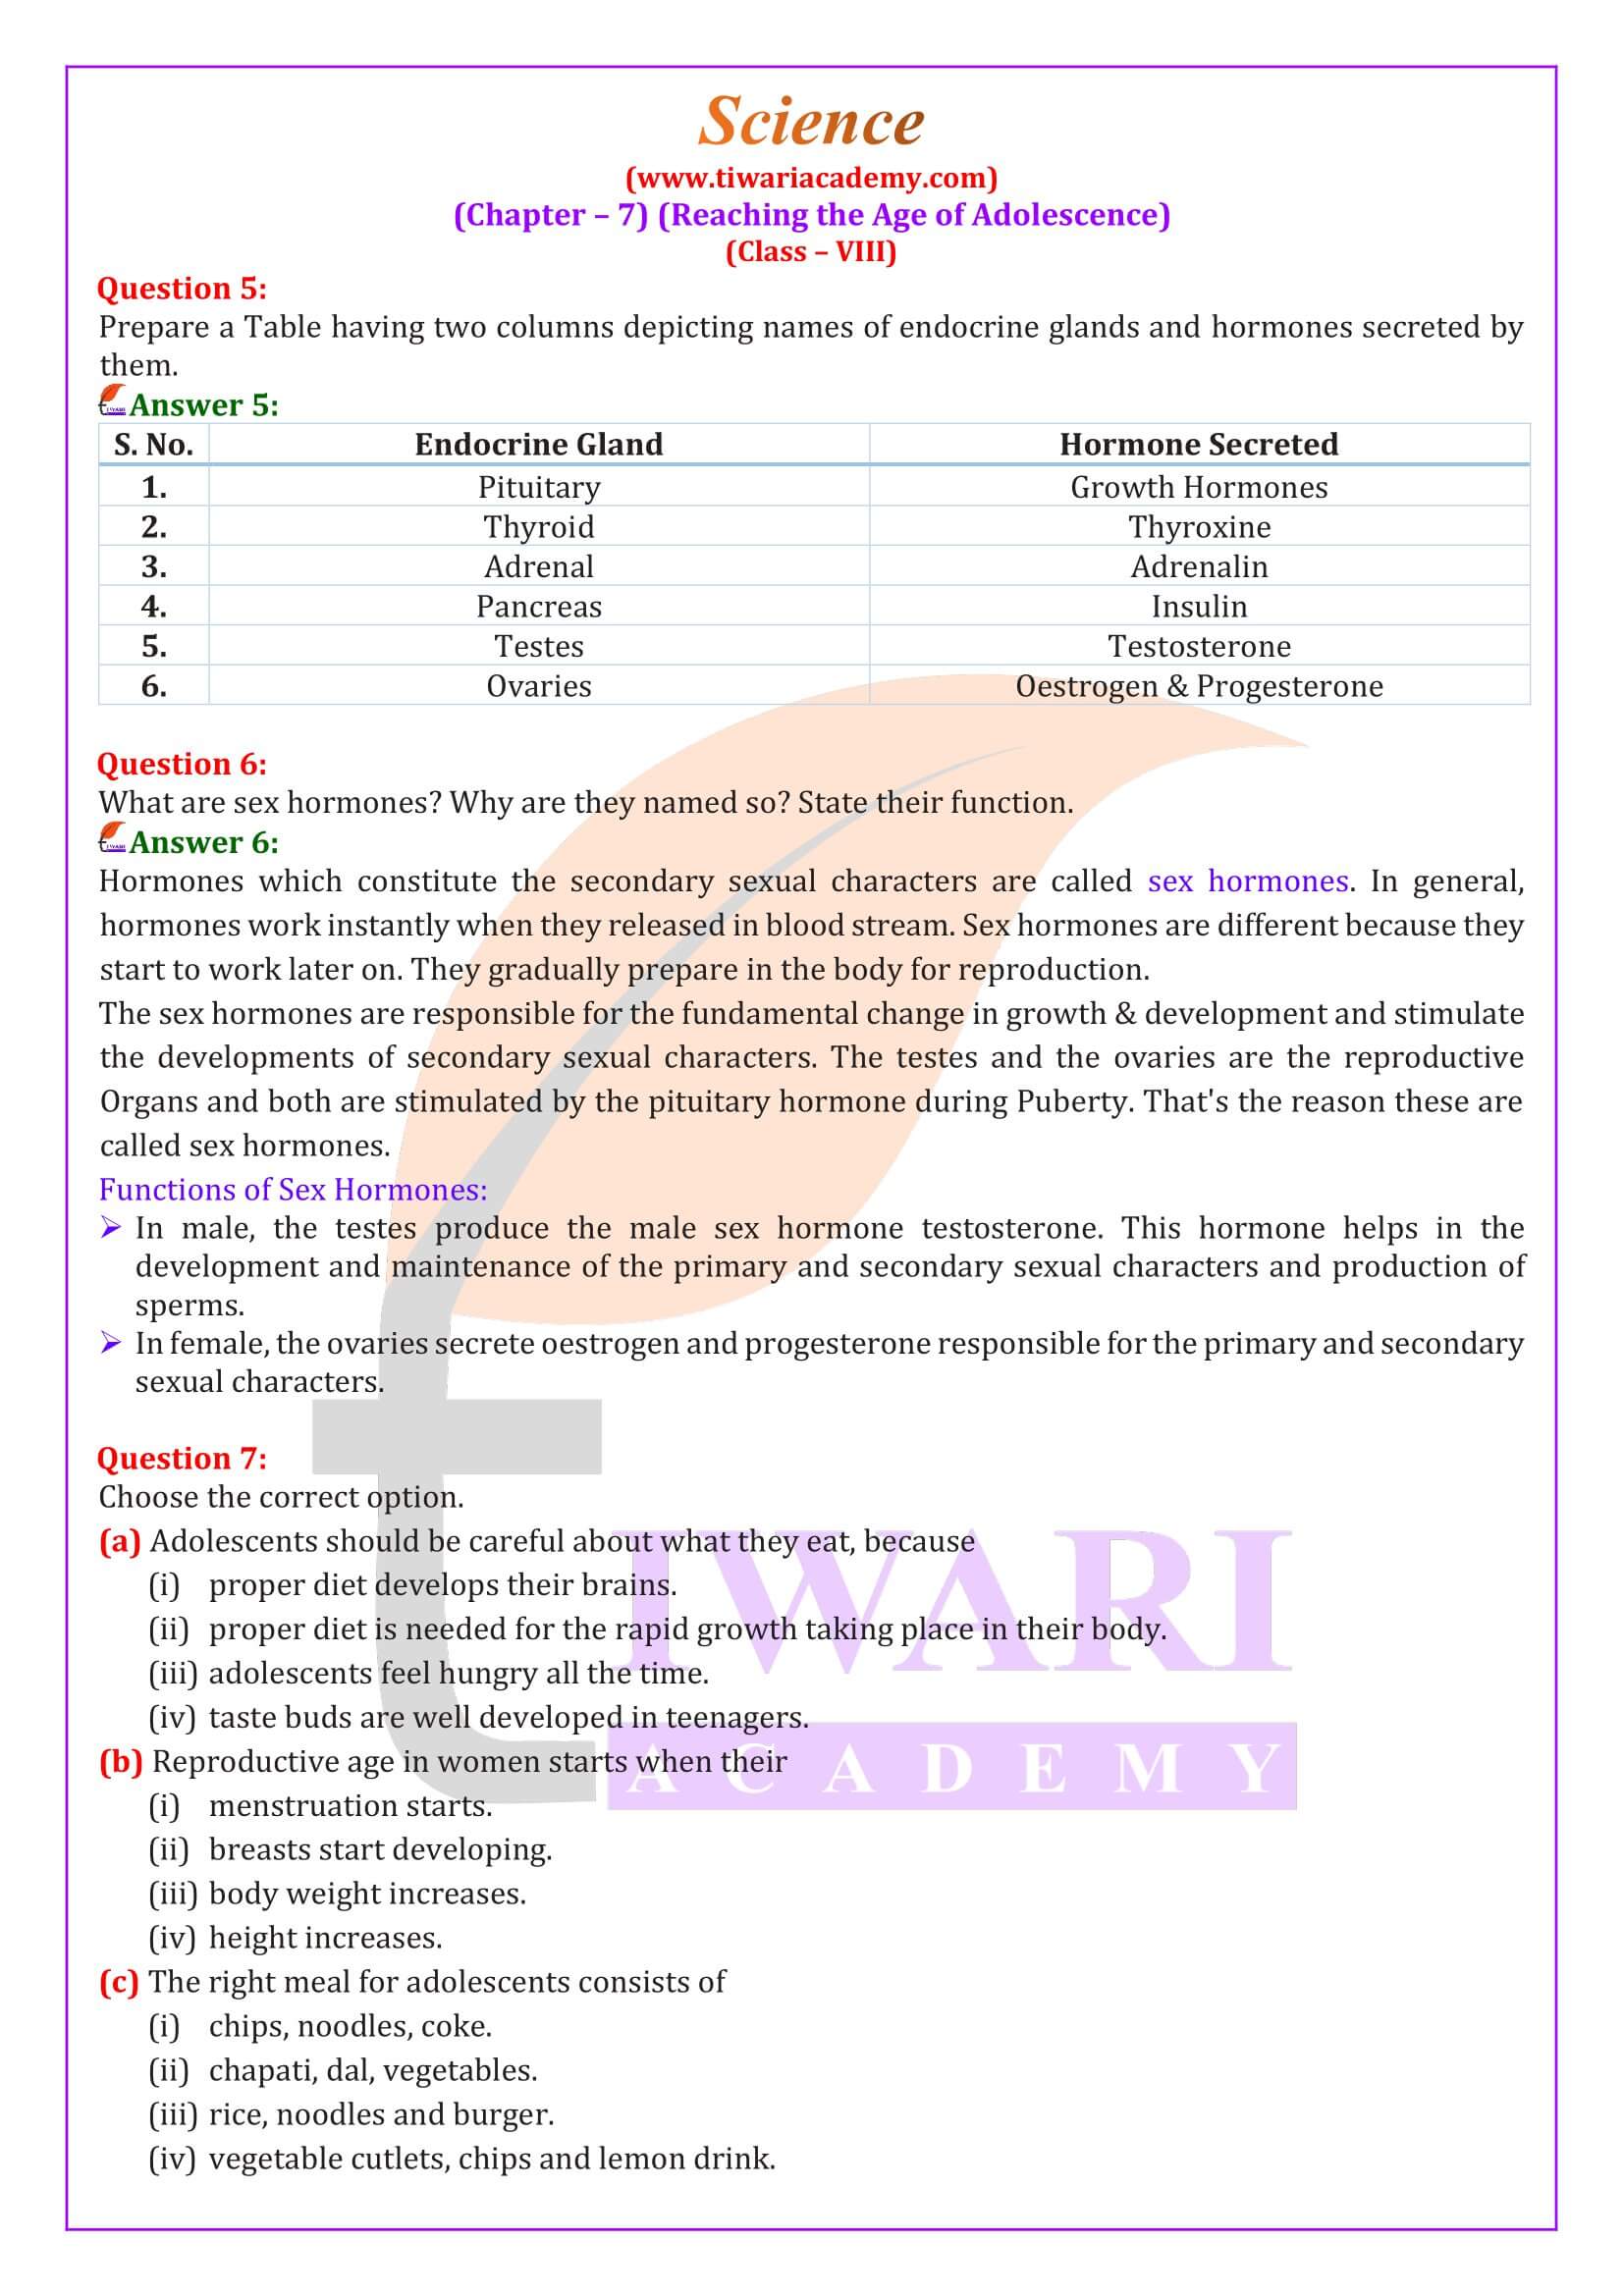 NCERT Solutions for Class 8 Science Chapter 7 in English Medium